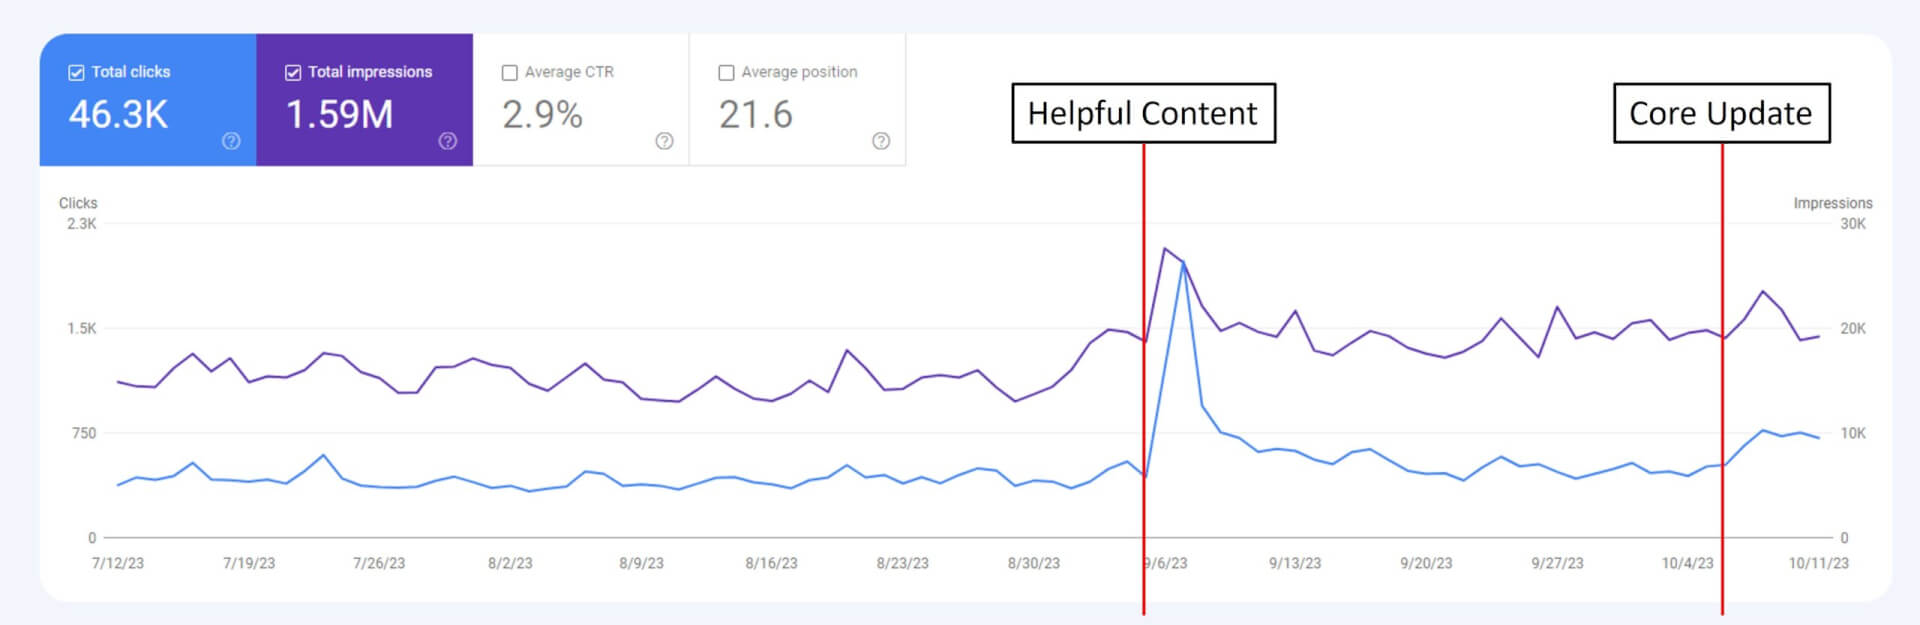 helpful content and core update seo case study